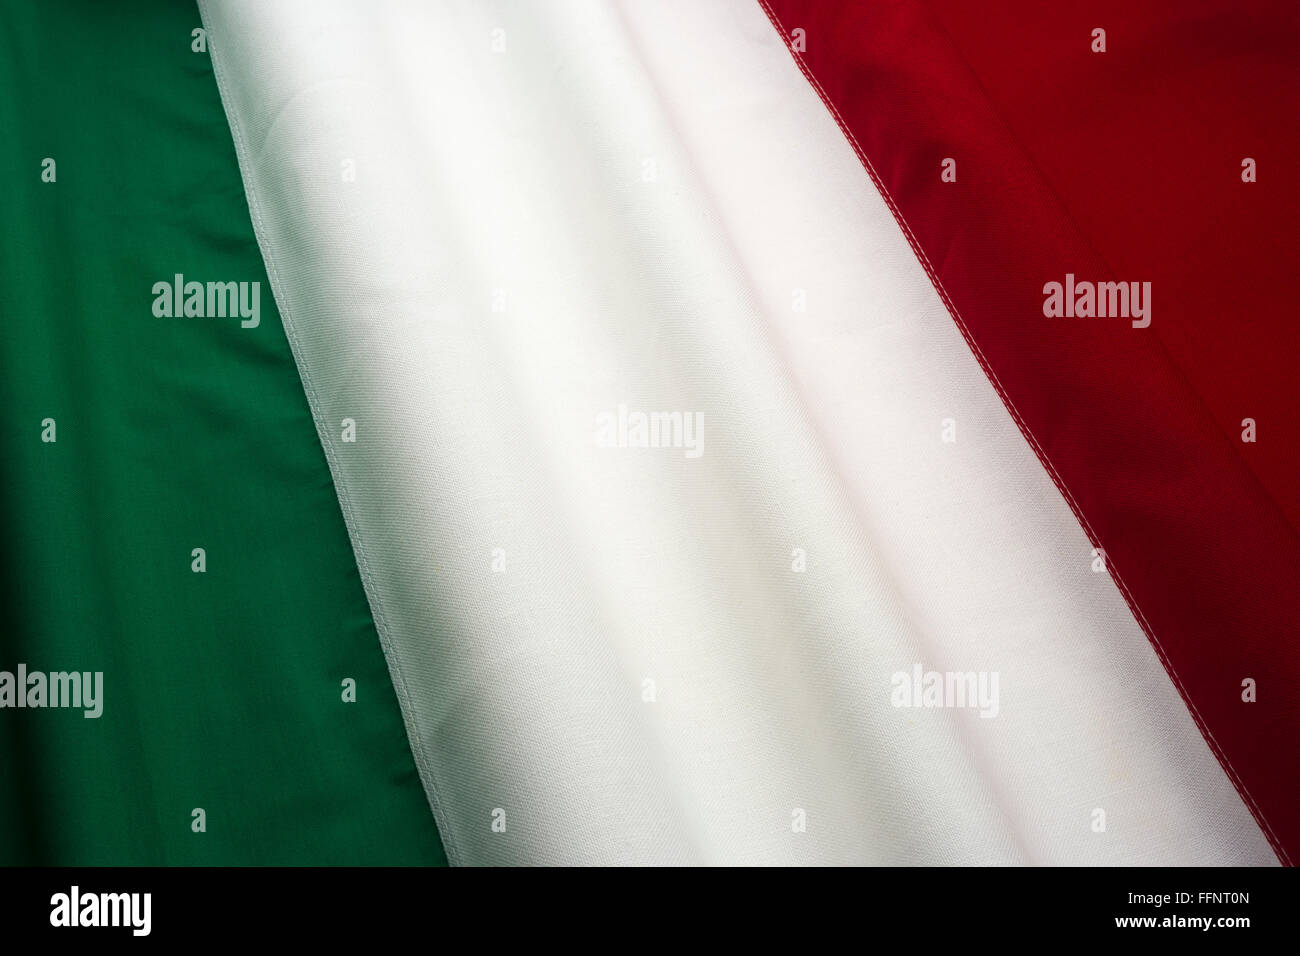 ITALIAN FLAG MADE OF STITCHED COTTON BUNTING Stock Photo